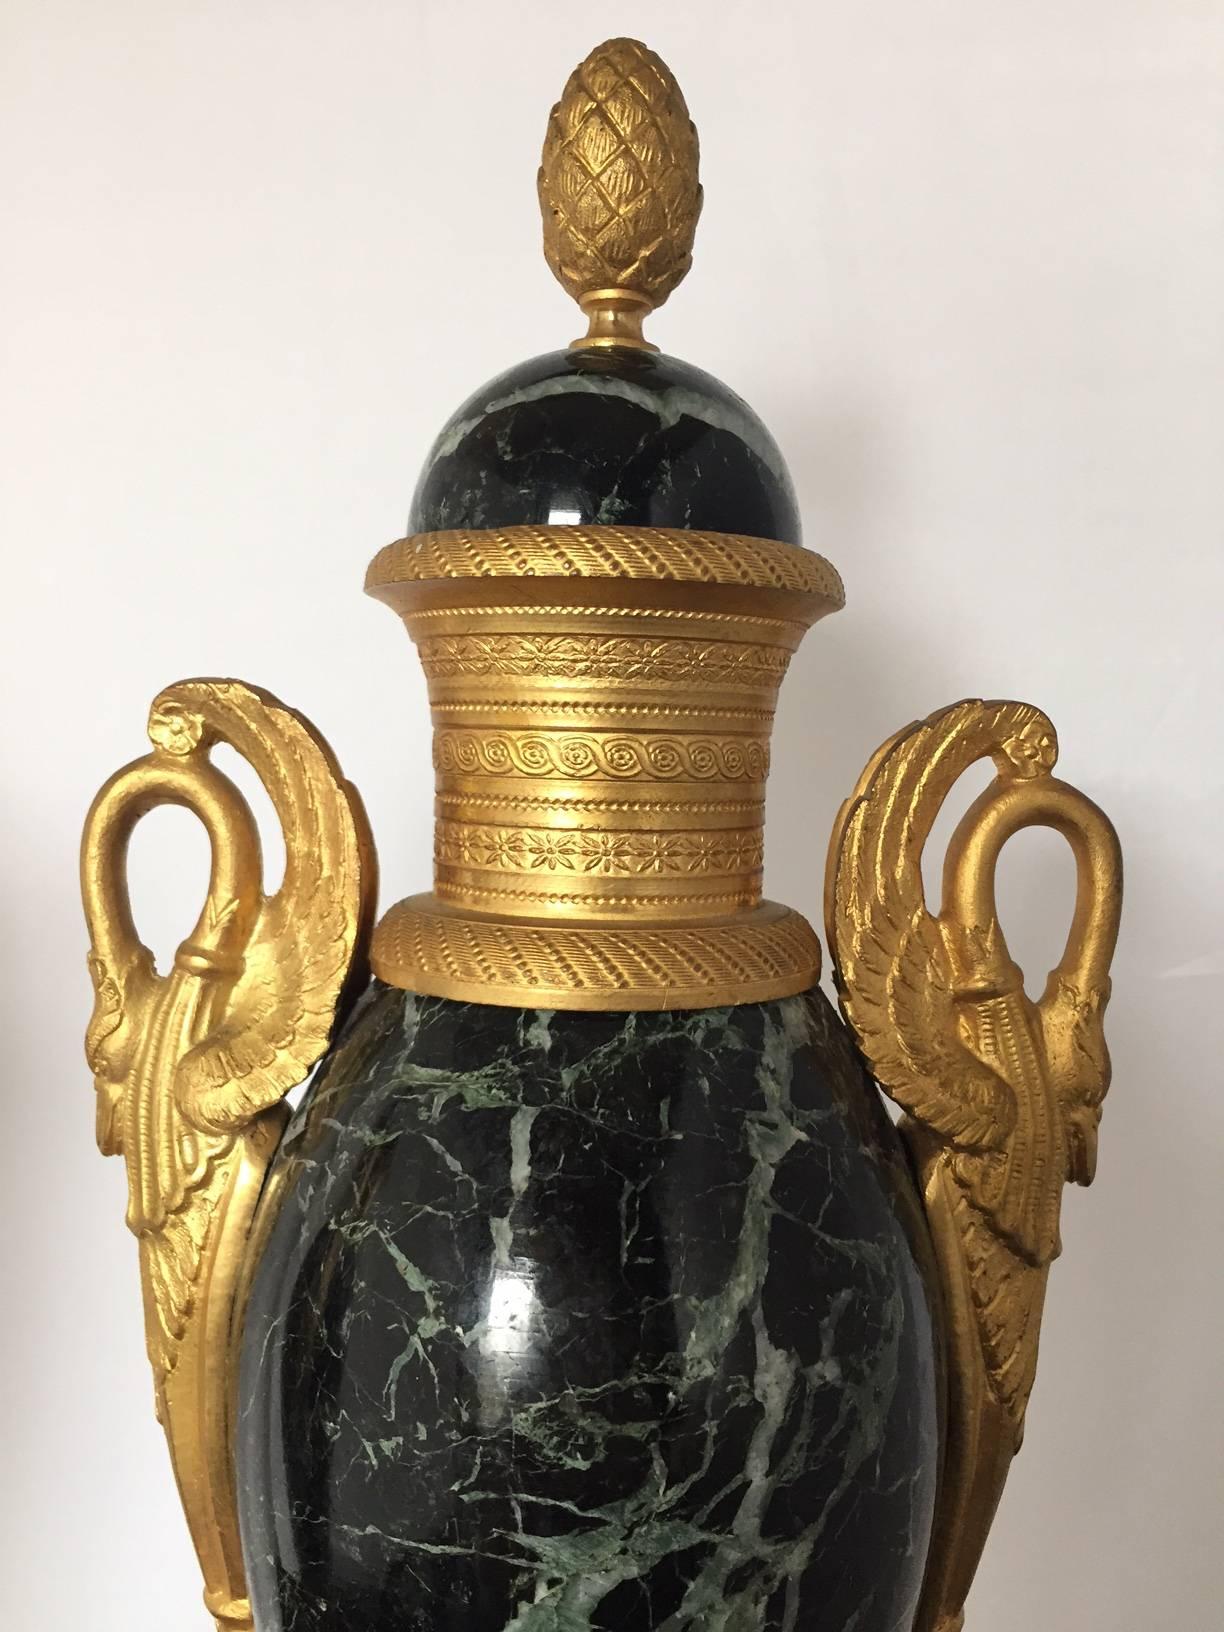 A fabulous pair of mantel urns in marble and beautifully cast gilt bronze in the form of swans, the green to black color of the marble with quartz veins, the foot
with decorative mounts in the form of griffins, bows and wreaths. A fantastic pair in